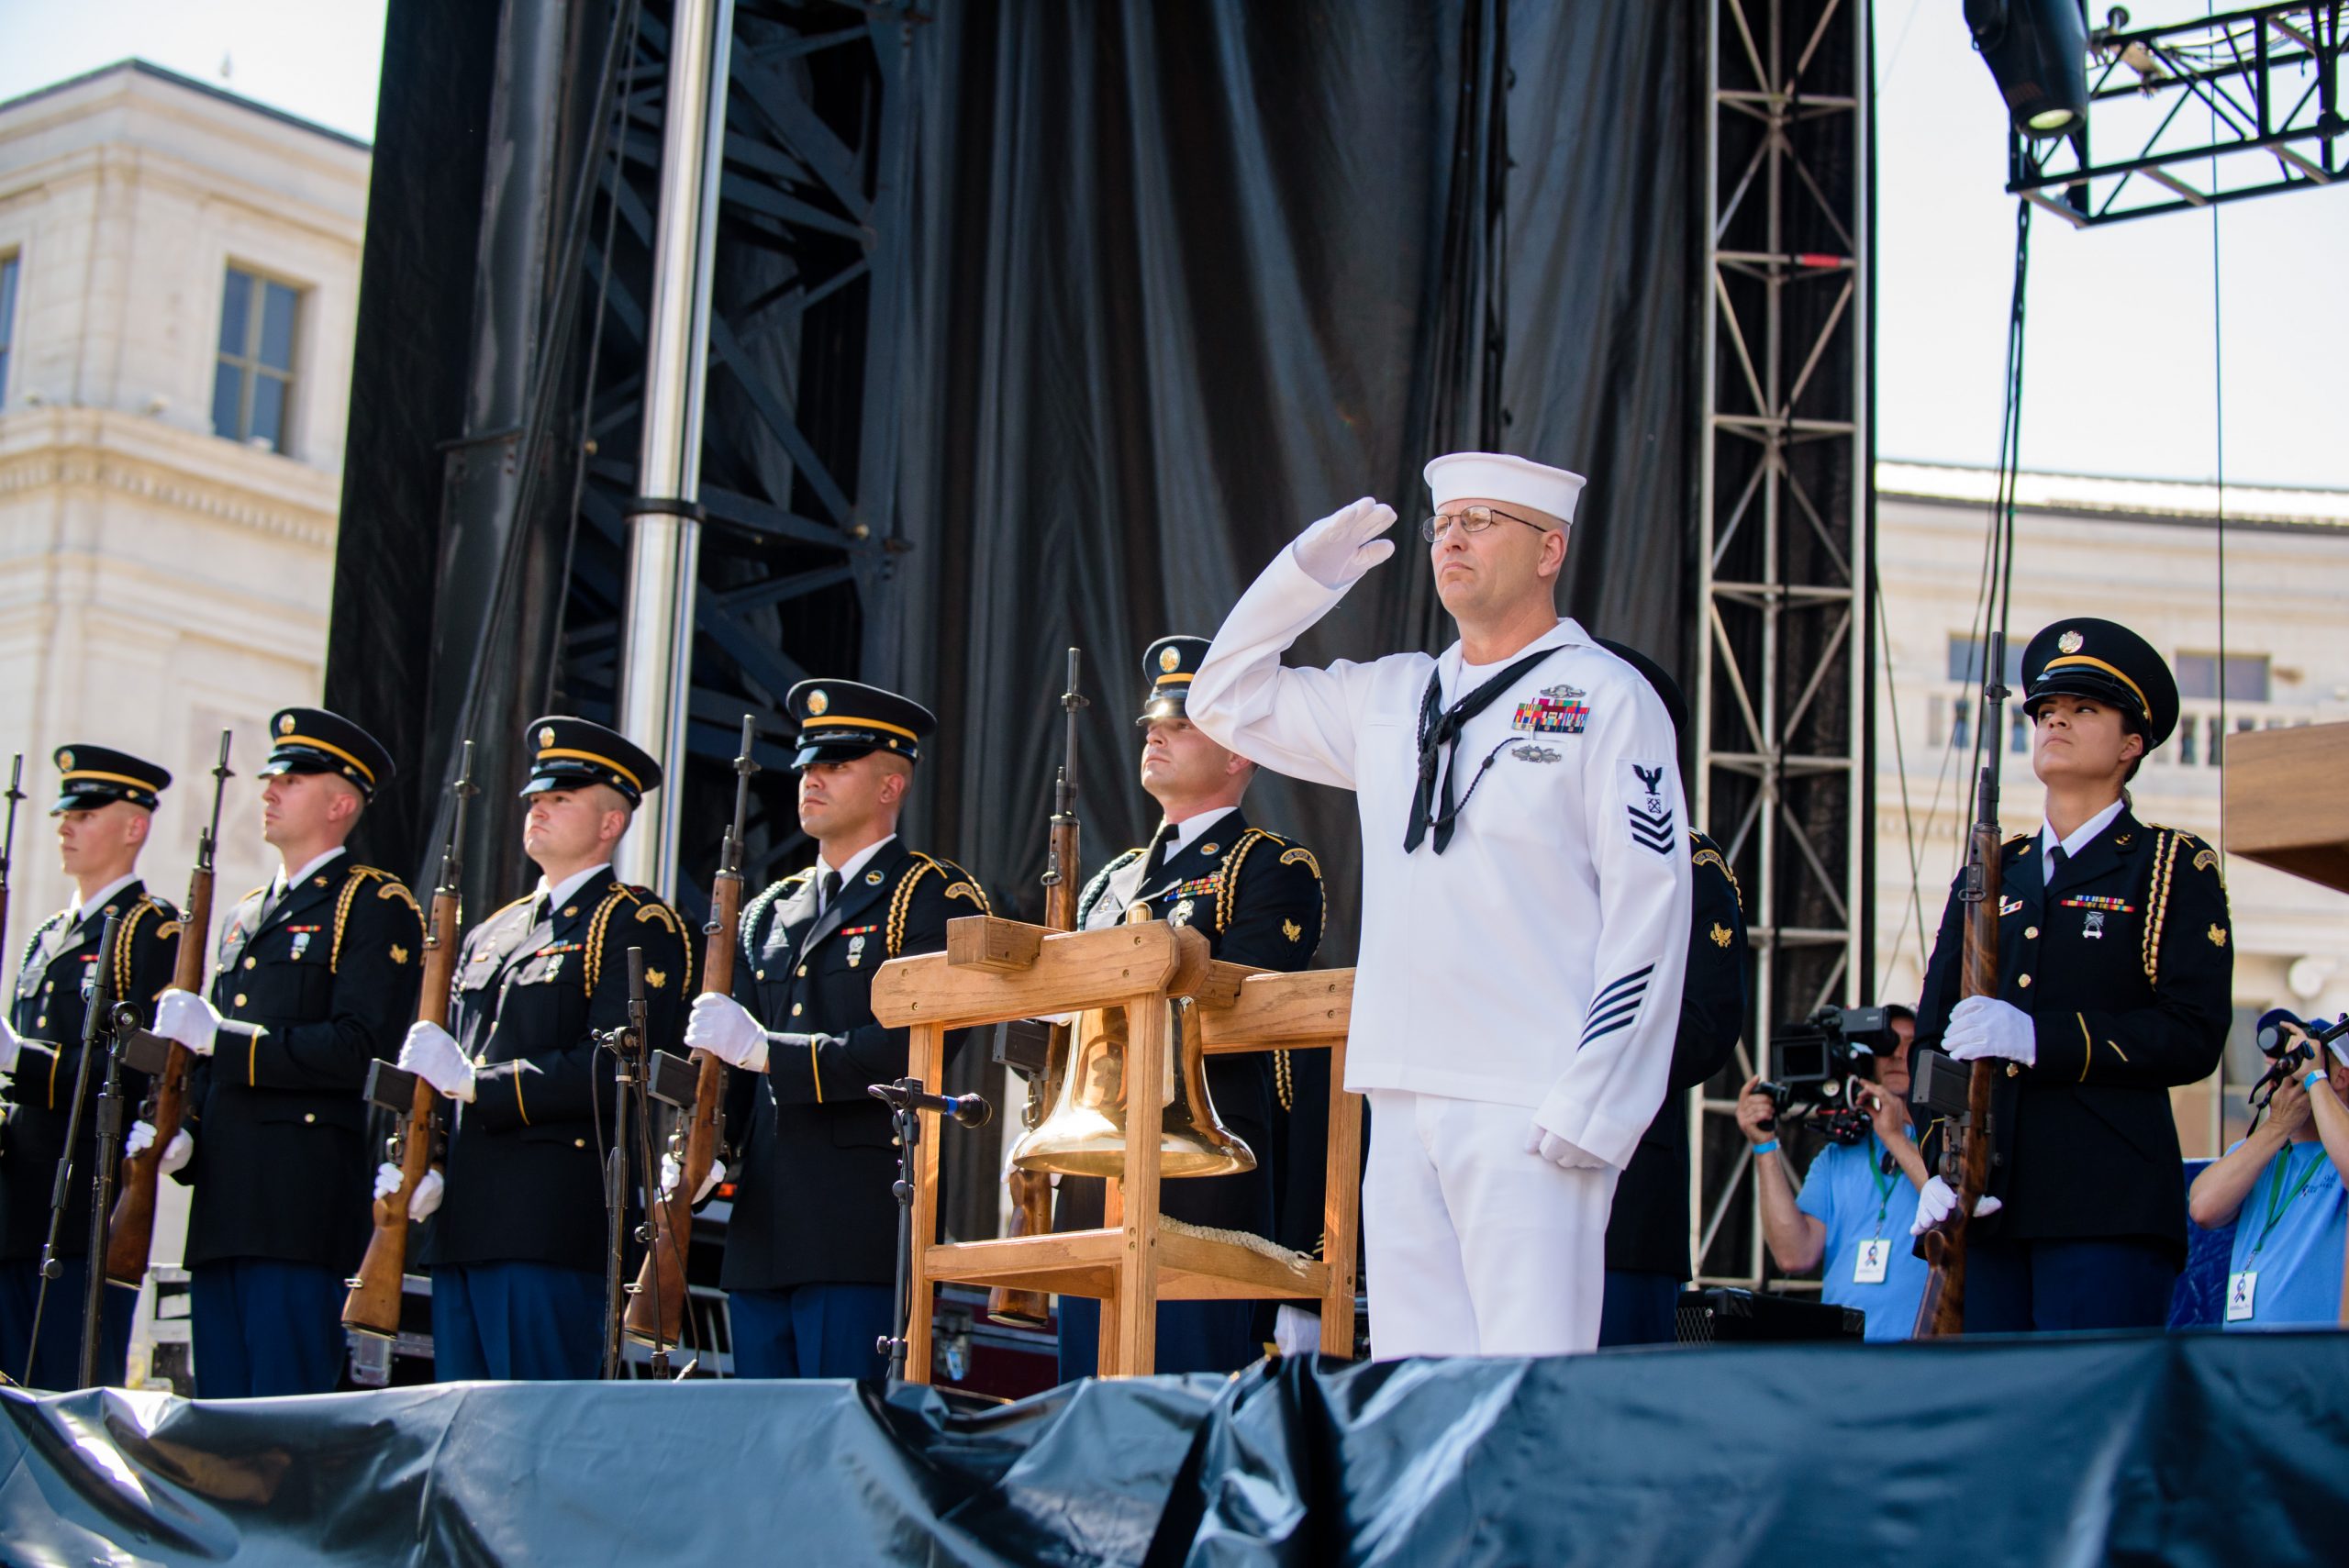 Naval officer saluting on stage